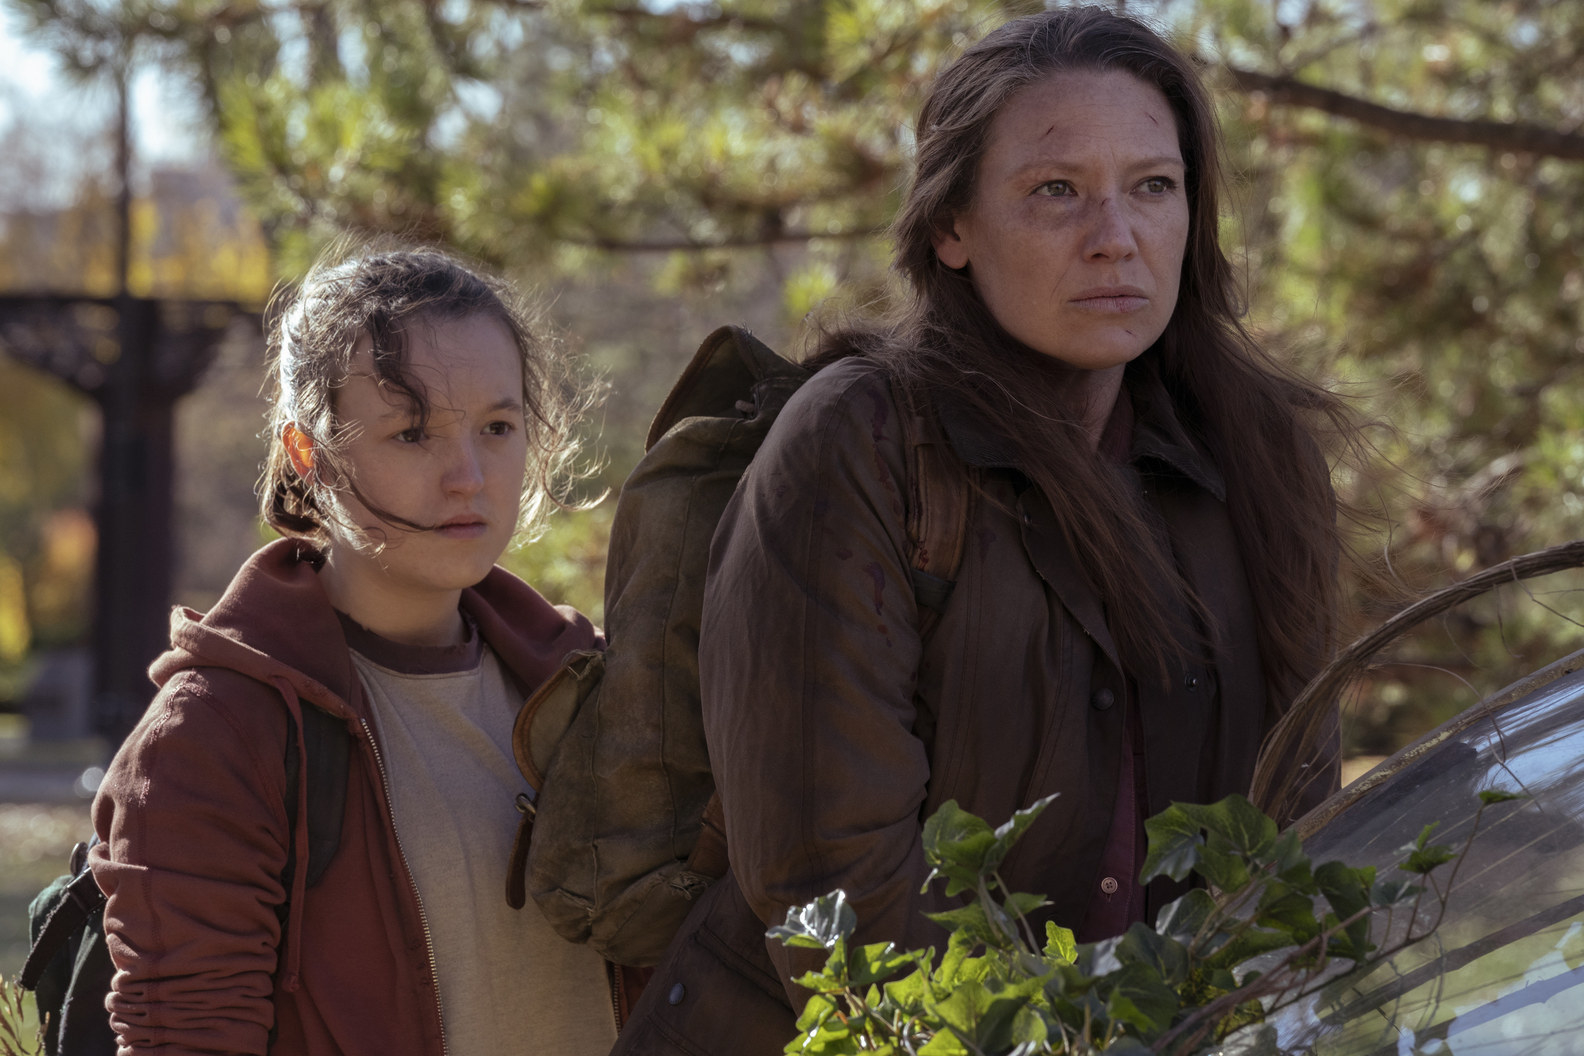 Bella Ramsey and Anna Torv look disheveled as they wanted through trees in the show